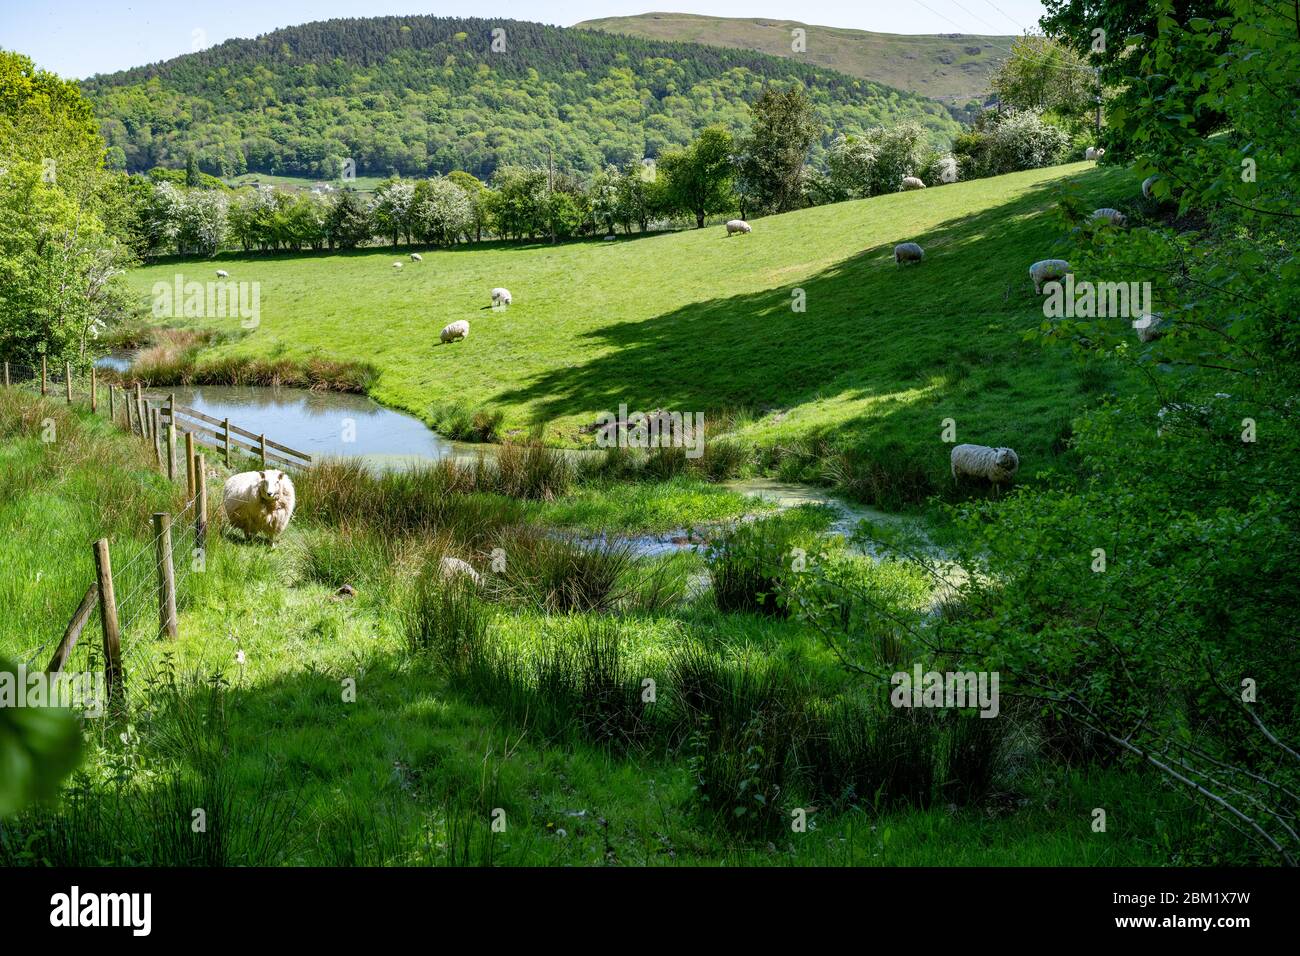 Wetland area on the edge of a field of sheep with hills in the background. Stock Photo